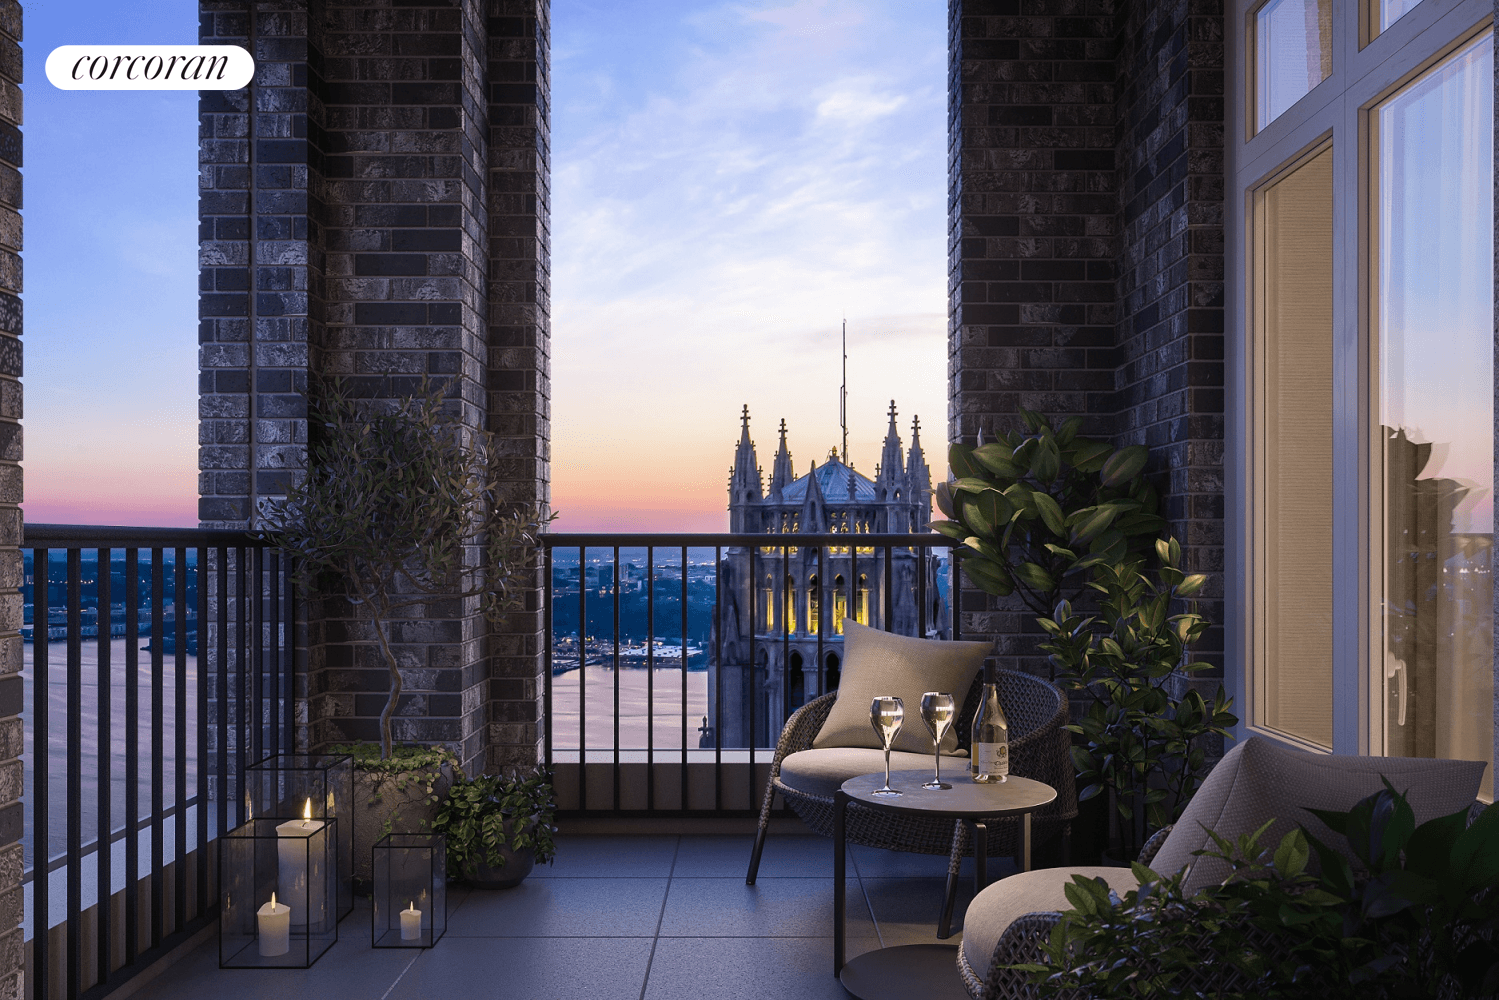 This three bedroom, two bathroom home with powder room offers sweeping southern and western views over the Hudson River, Riverside and Central Park, and the iconic spire of Riverside Church.